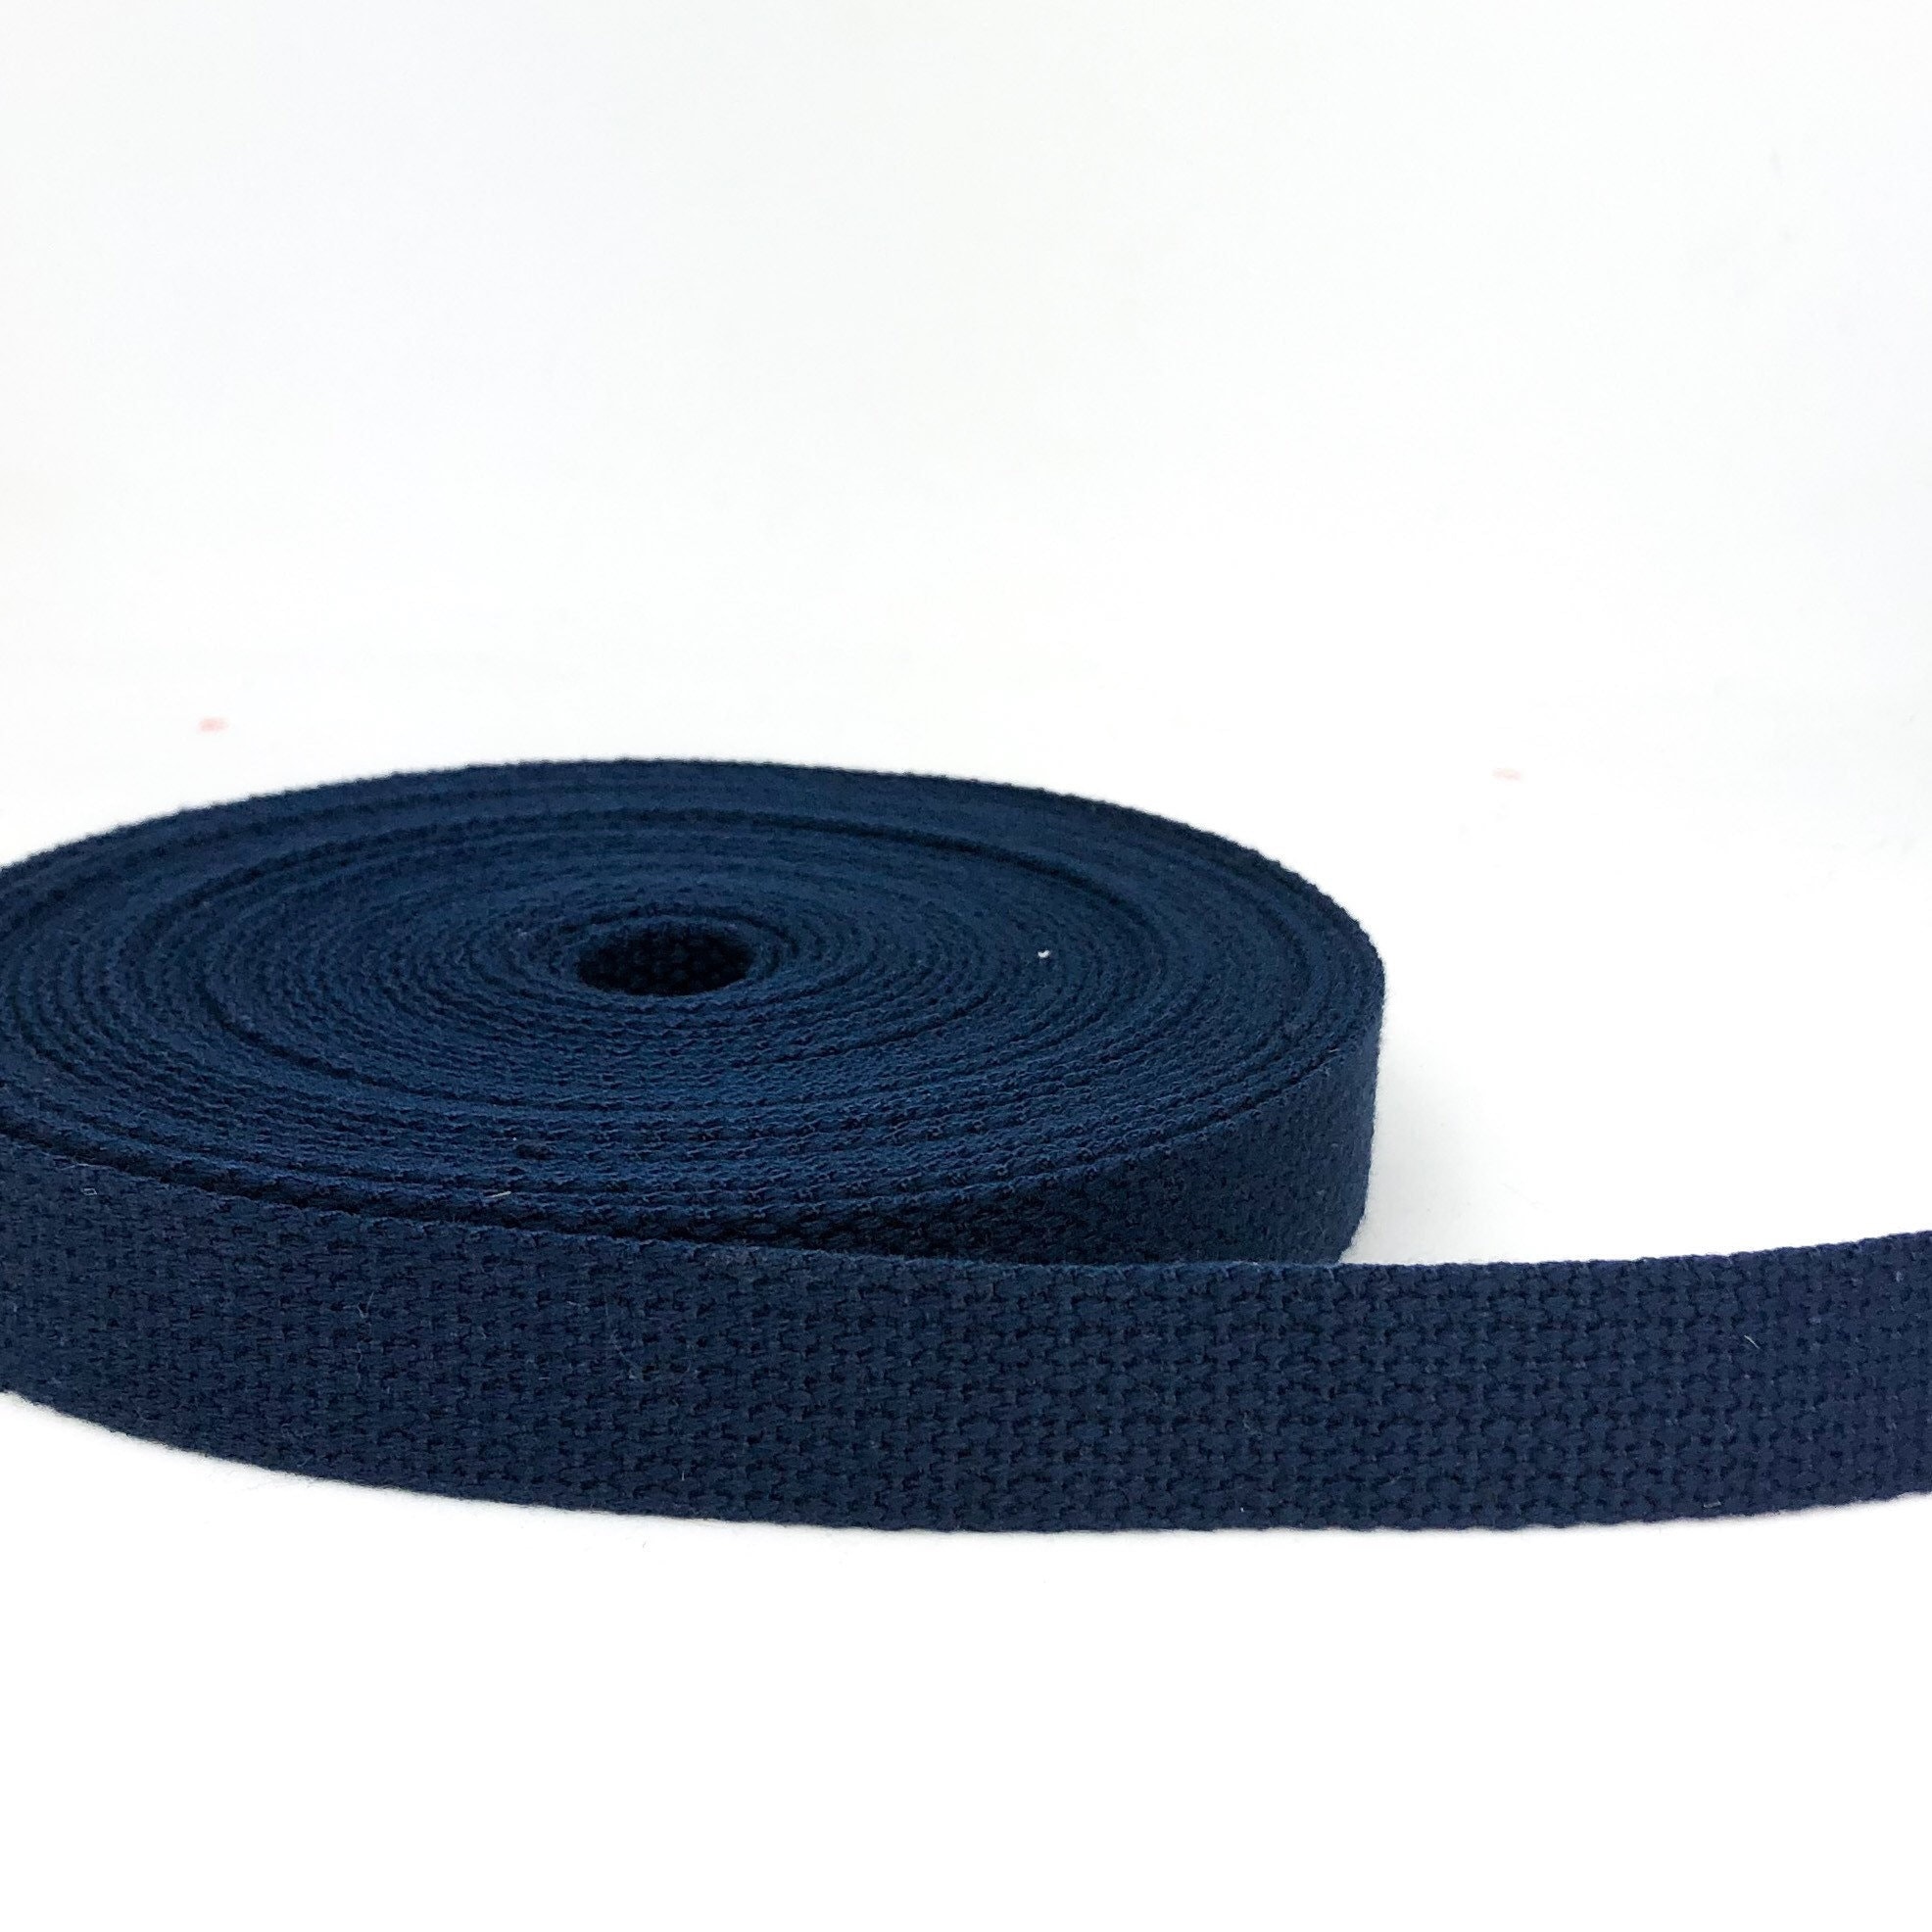  Ribbon 6yards/Lot 30mm Cotton Webbing Strap Canvas Cotton  Ribbon DIY Knapsack Strapping Bags Crafts for Belt Bag Dog Accessories  Wedding Trimming (Color : E, Size : One Size)